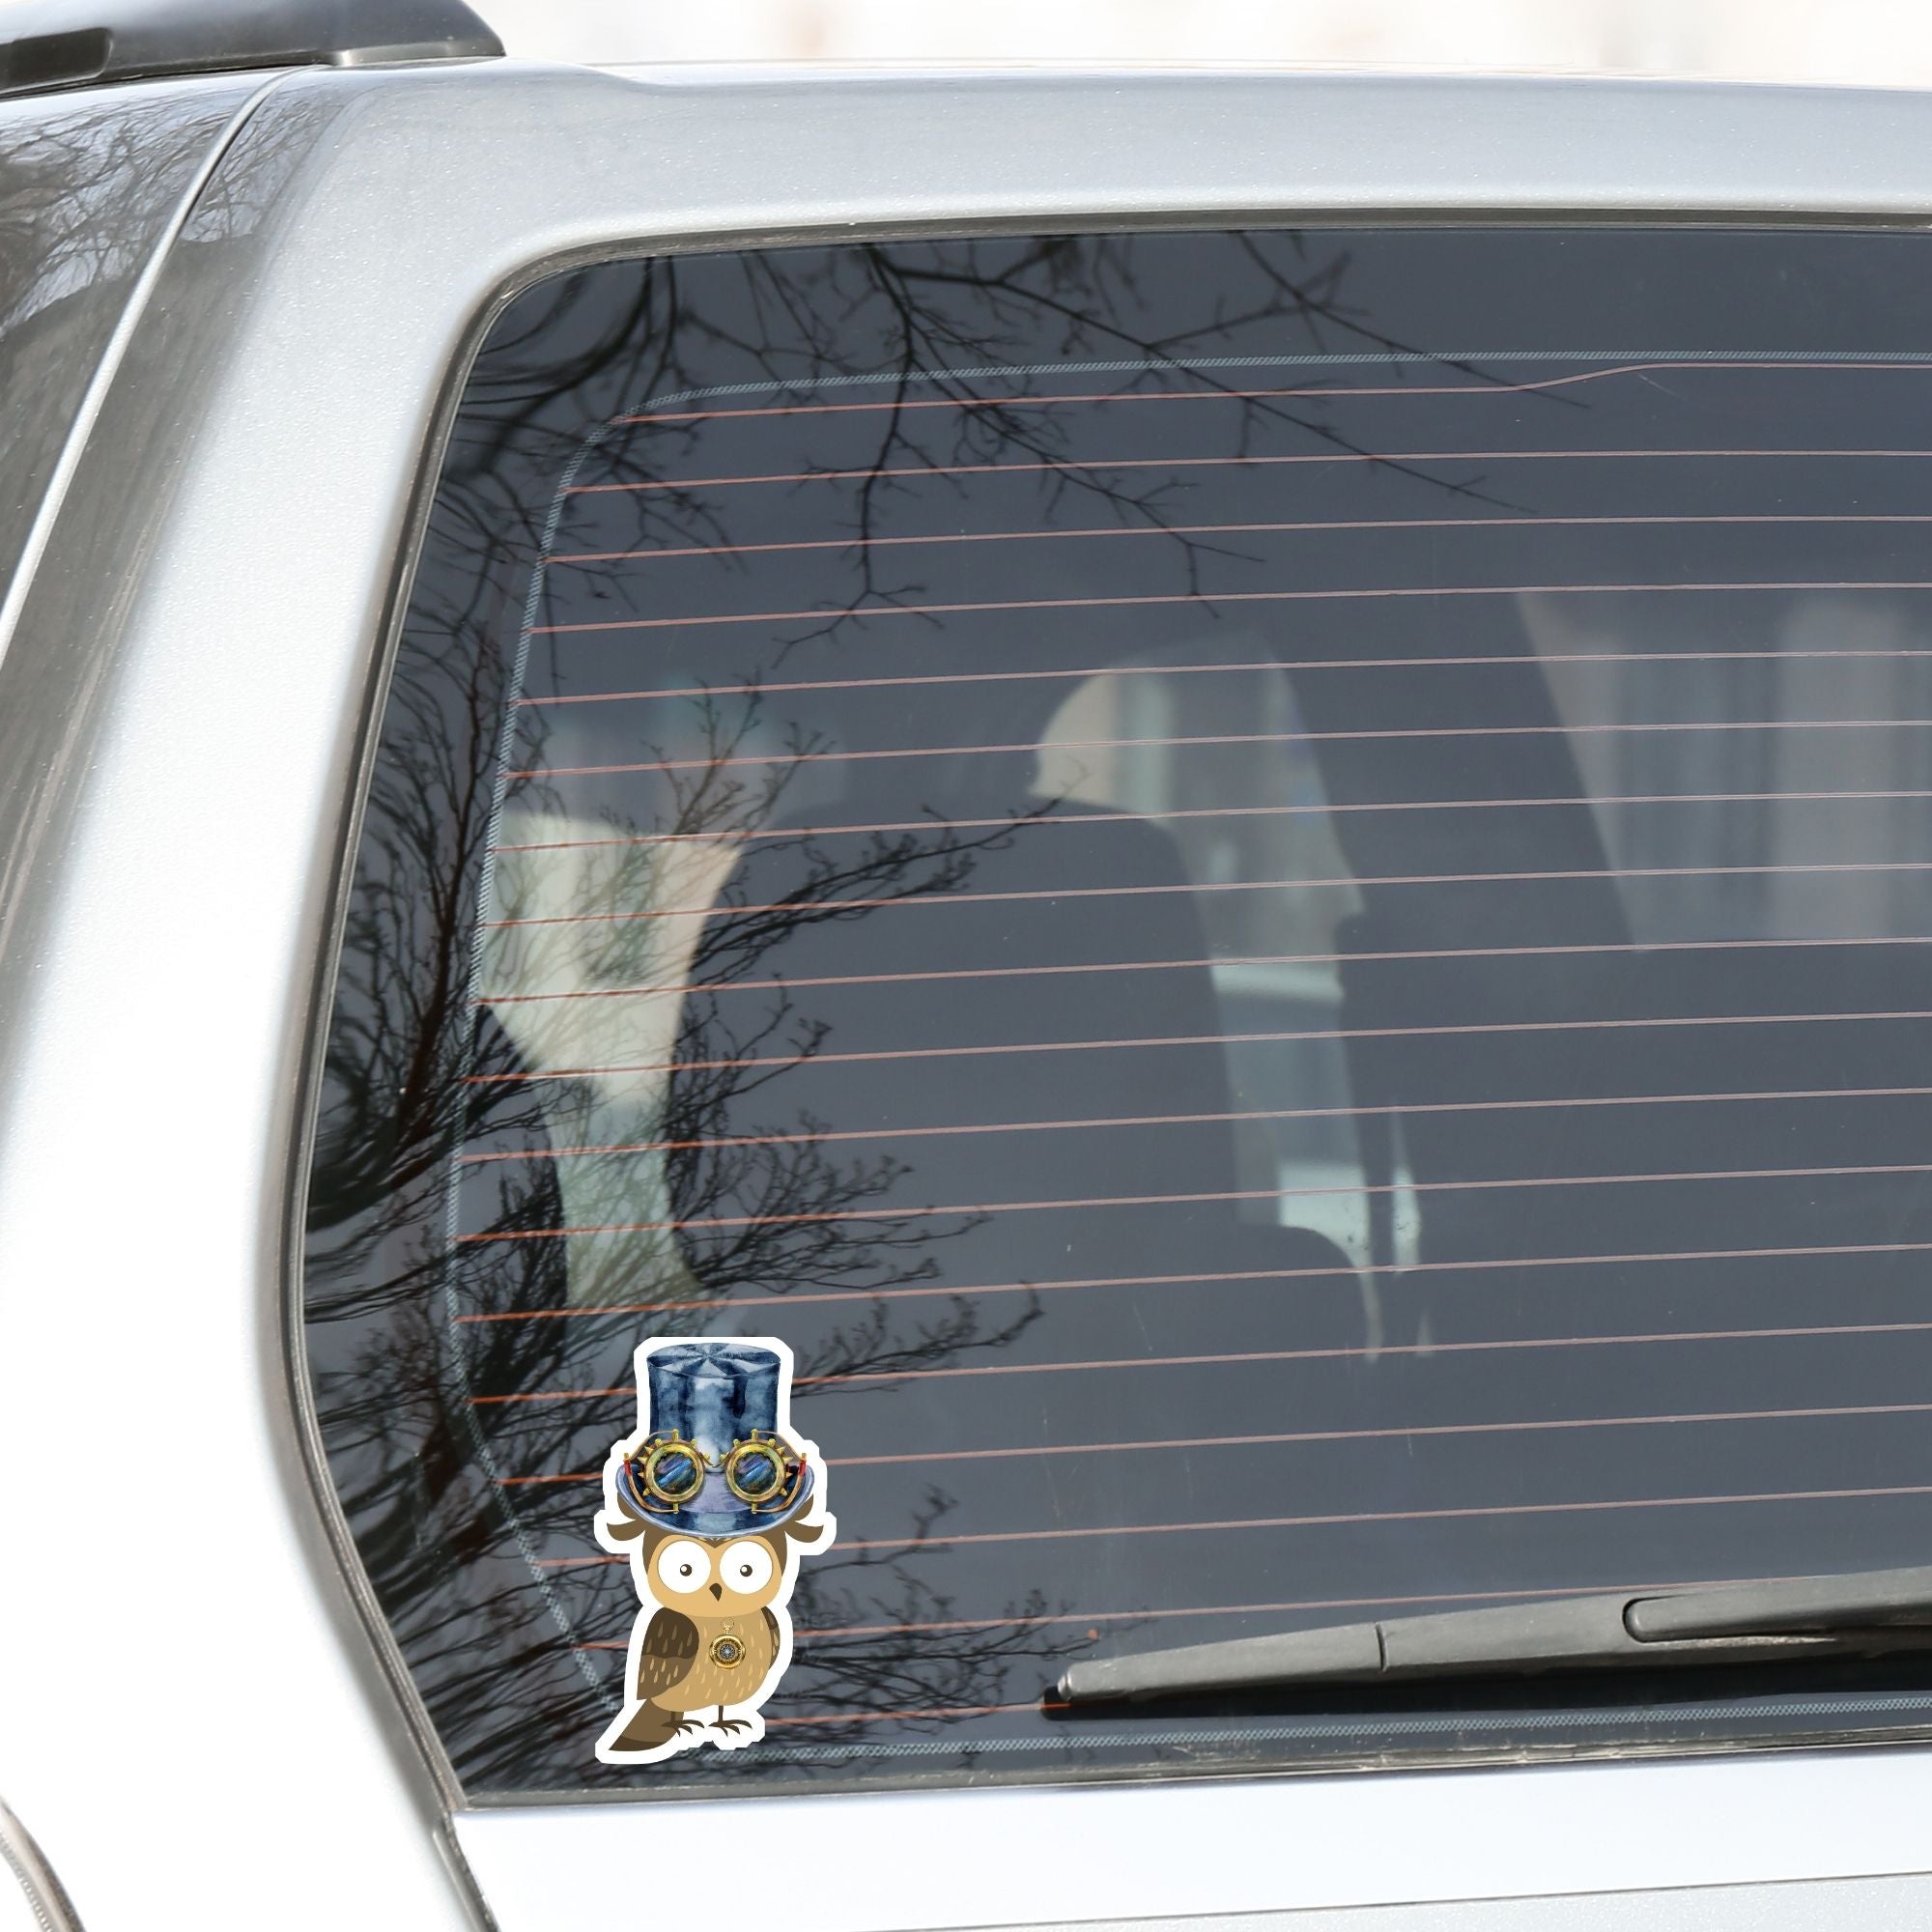 Mrs. Owl is sporting a steampunk hat with goggles and she has her own steampunk watch necklace. This image shows the Mrs. Owl steampunk sticker on the back window of a car.